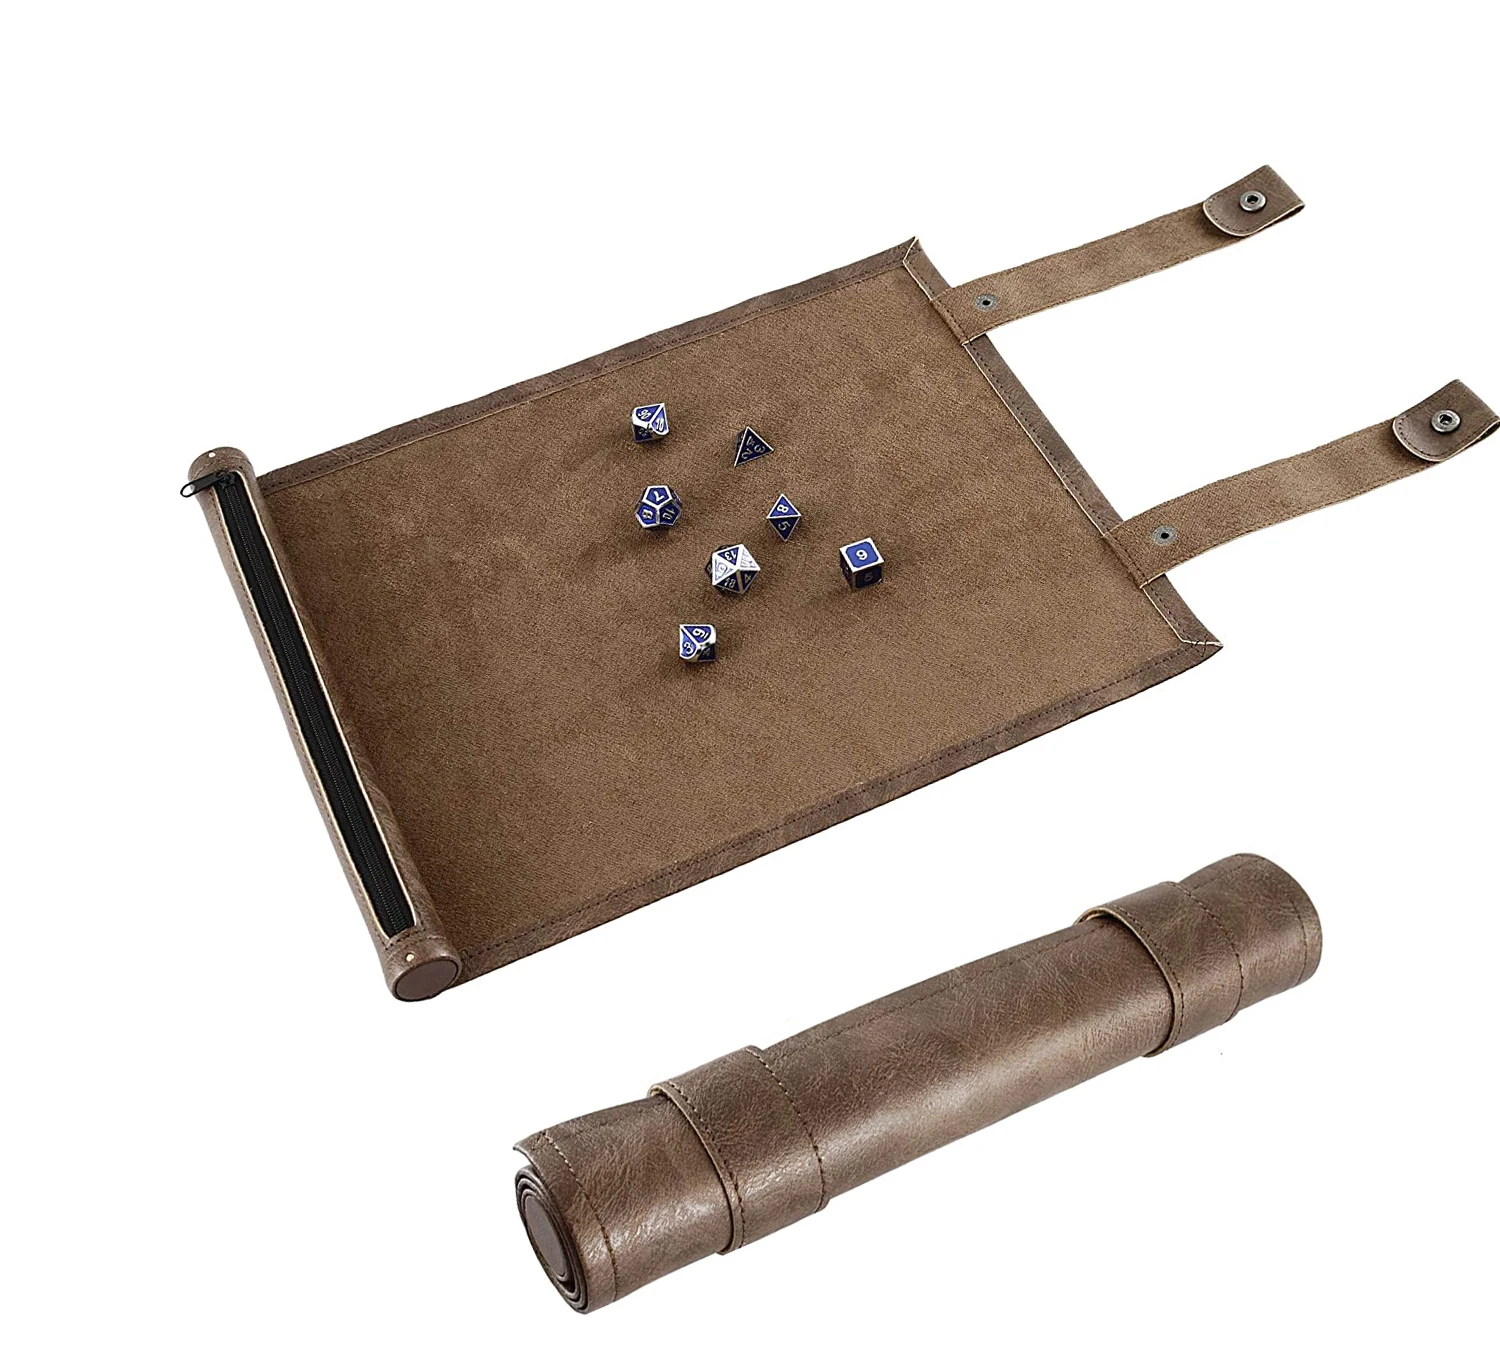 

Leather Scroll Dice Tray and Rolling Mat with Zippered Dice Holder - Storage Pouch Holds up to 14 Metal or Plastic Dice, Black,brown,red or others